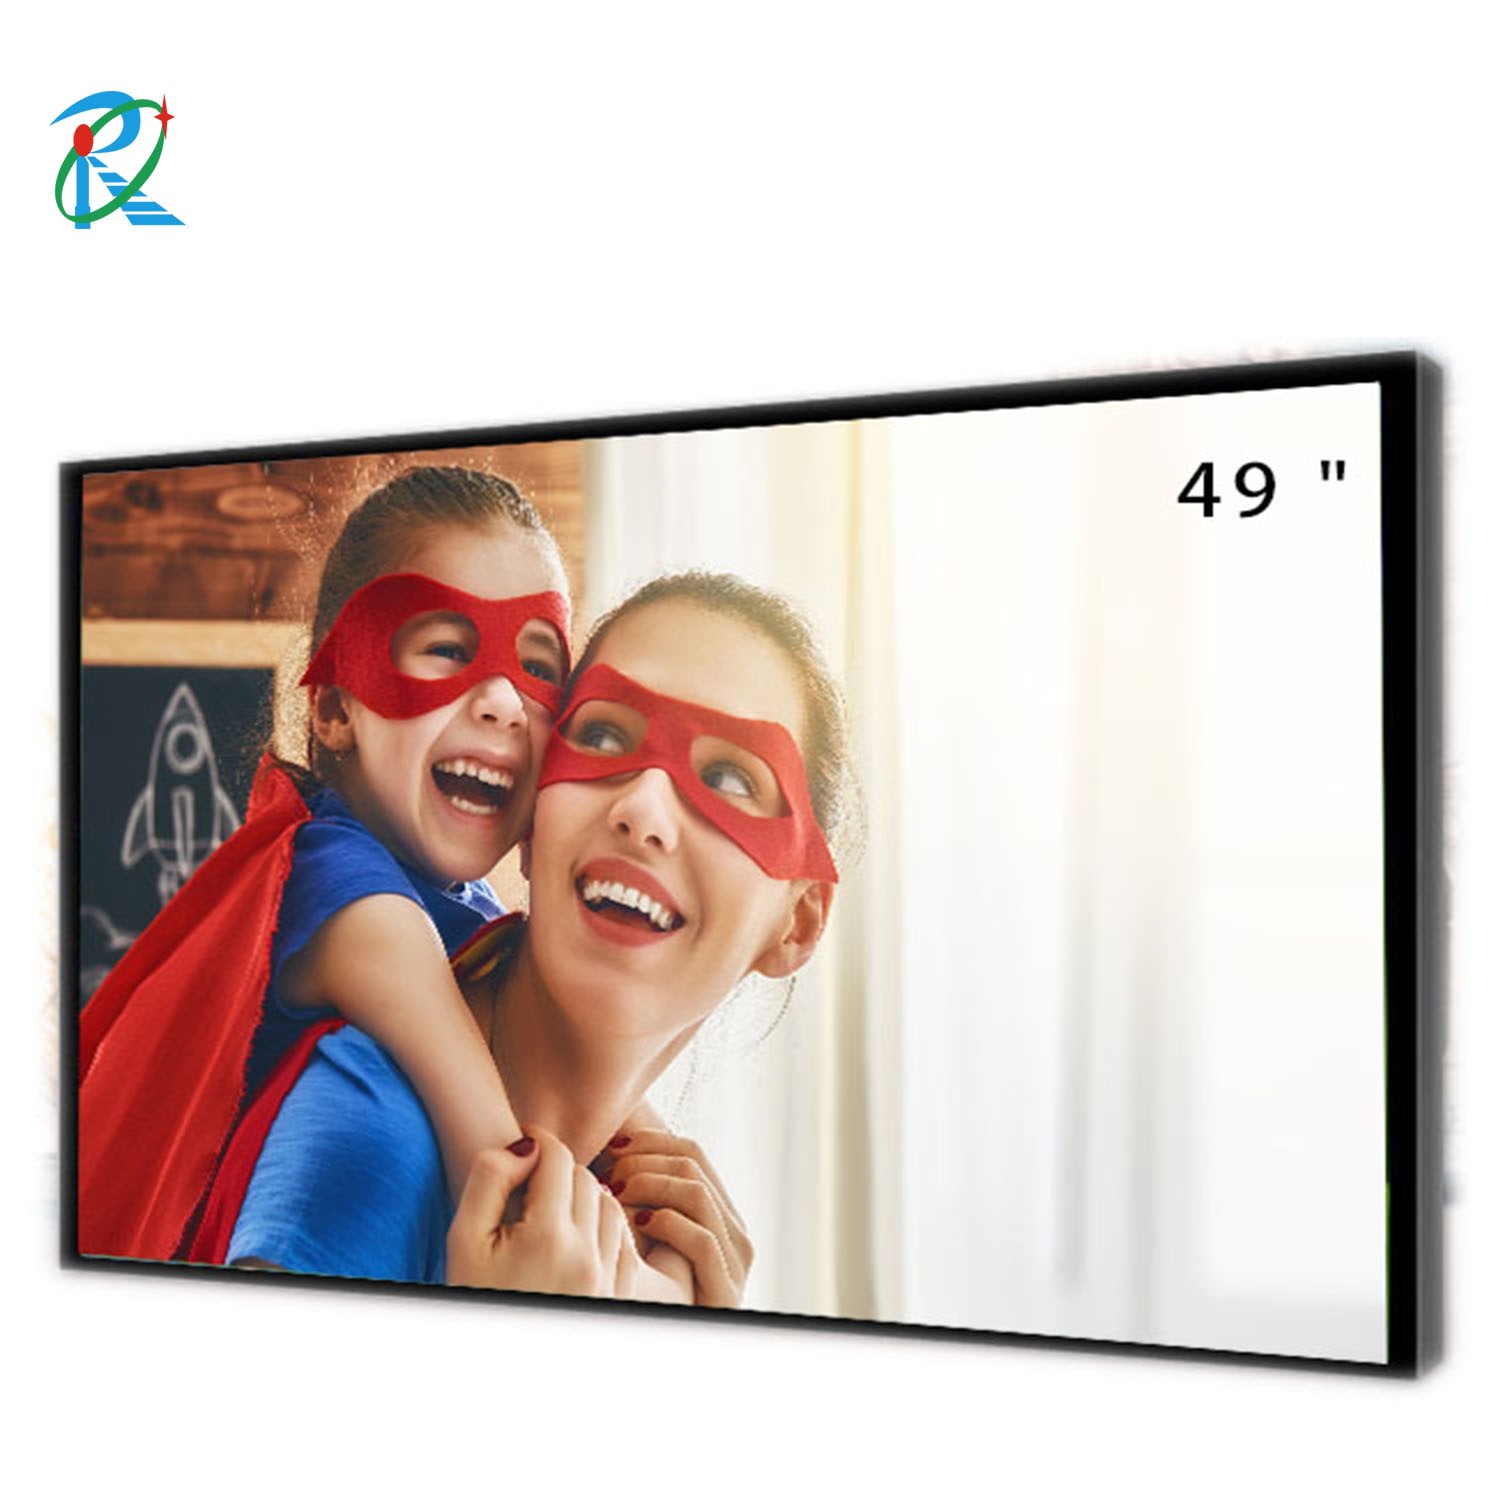 49 inch outdoor sunlight readable LCD display